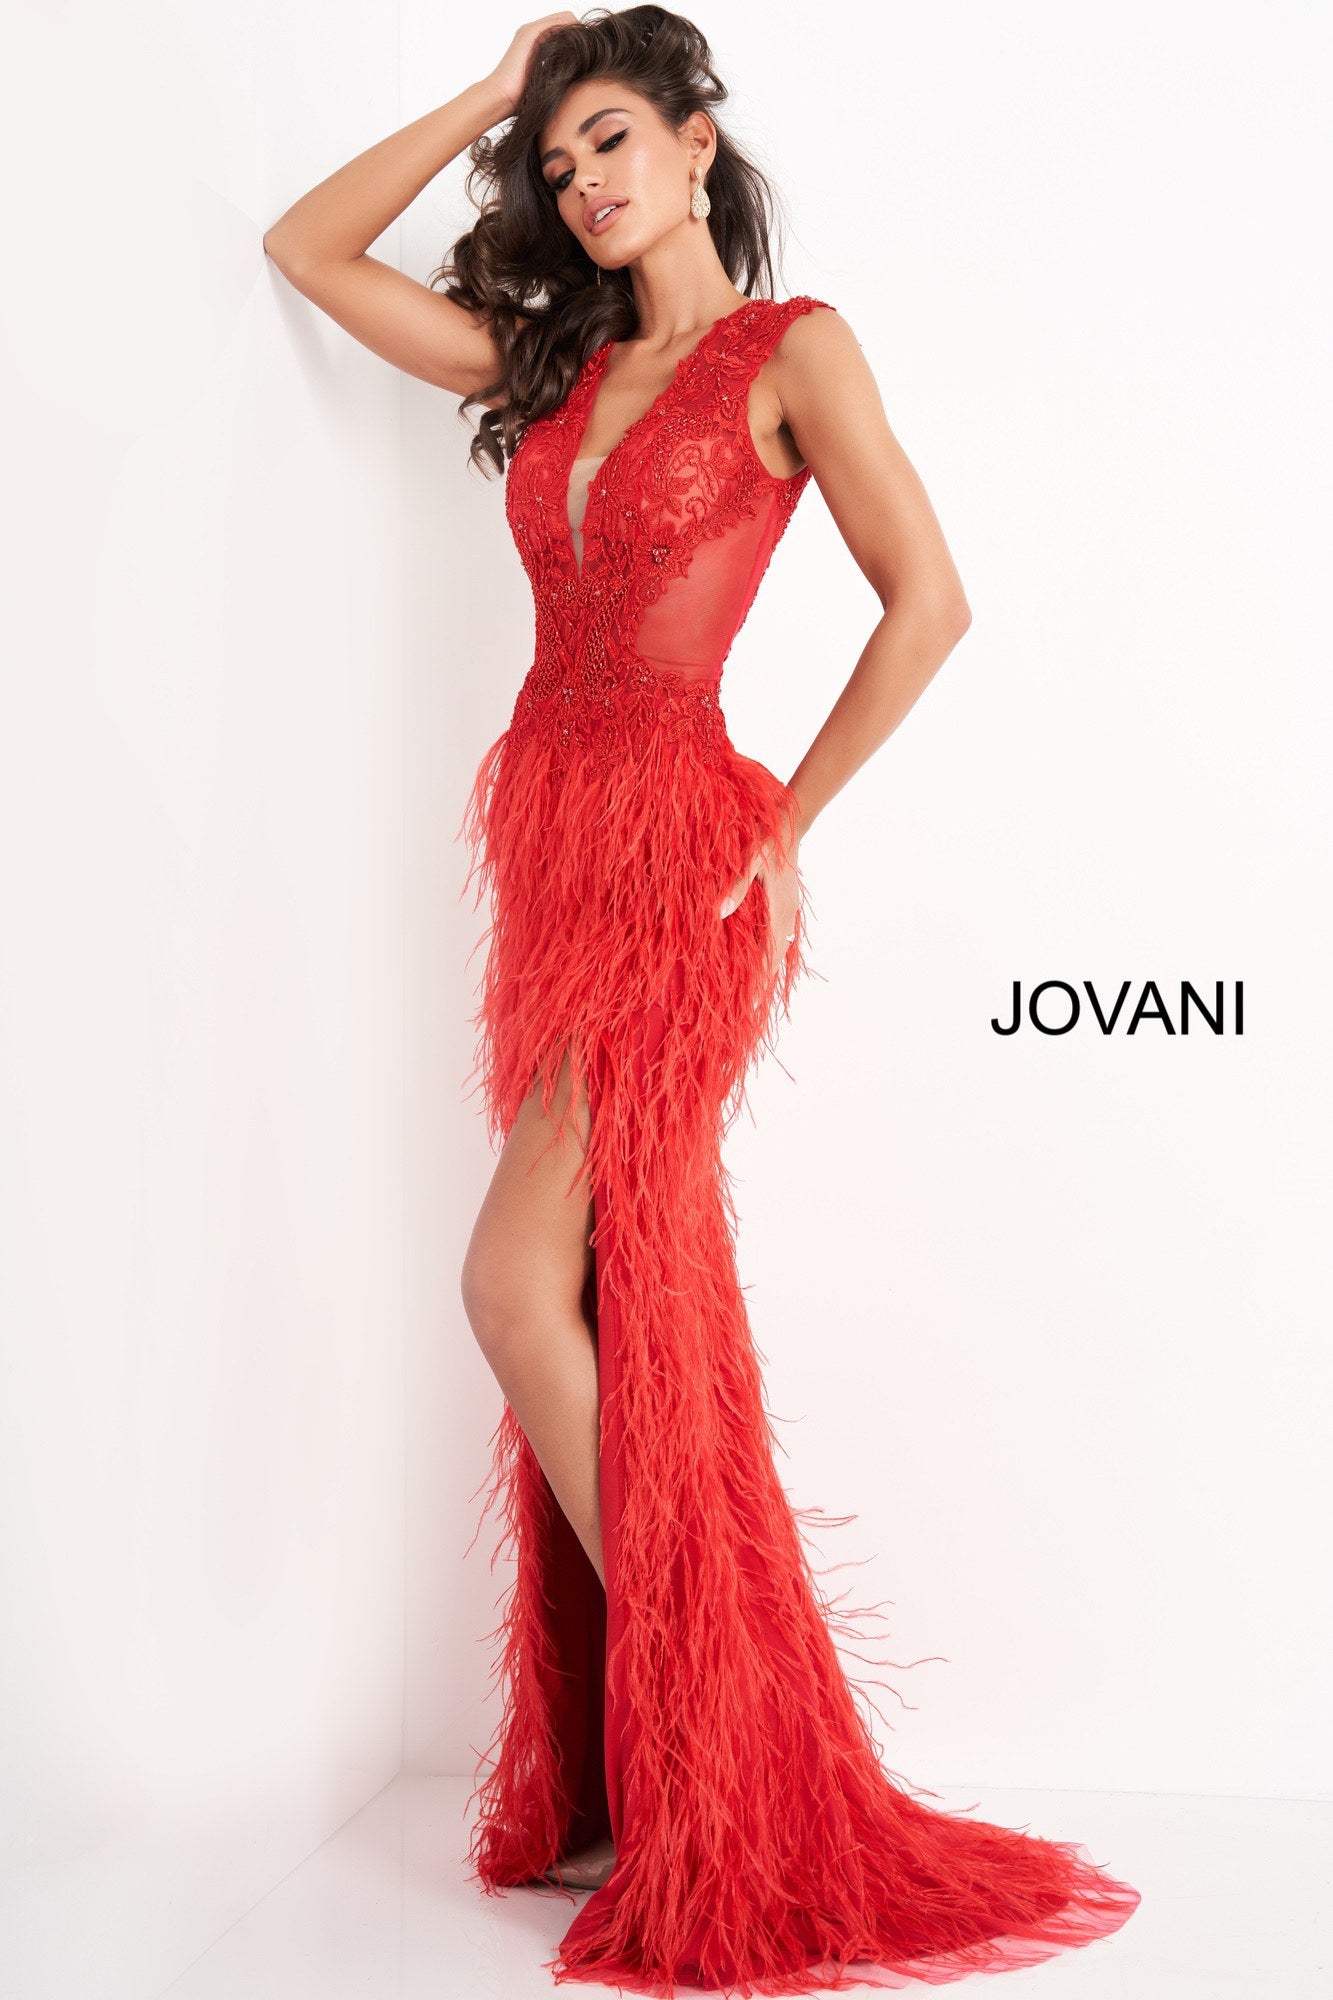 Jovani 06446 is a Gorgeous Red Carpet Ready Formal wear style! Featuring a fitted Plunging V Neck sheer lace embellished bodice with cap sleeves. Lush feather accented skirt with slit and sweeping train. This Prom Dress Features a backless cutout sheer back. Perfect pageant gown. Available Sizes: 00,0,2,4,6,8,10,12,14,16,18,20,22,24  Available Colors: BLUSH, LIGHT-BLUE, OFF-WHITE, RED